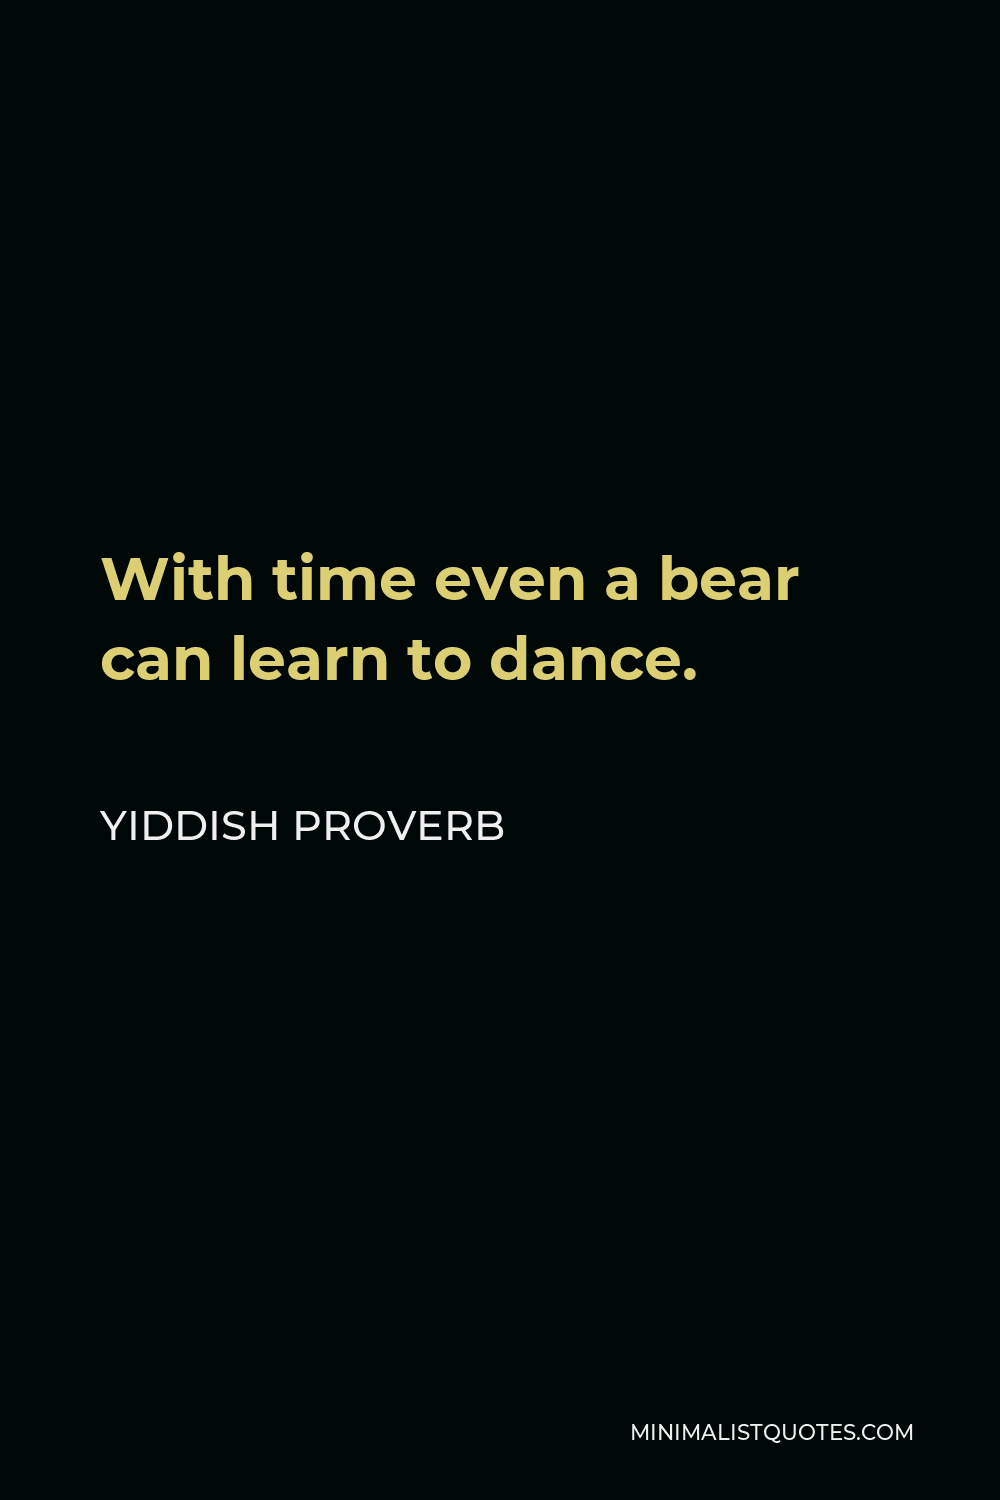 Yiddish Proverb Quote - With time even a bear can learn to dance.